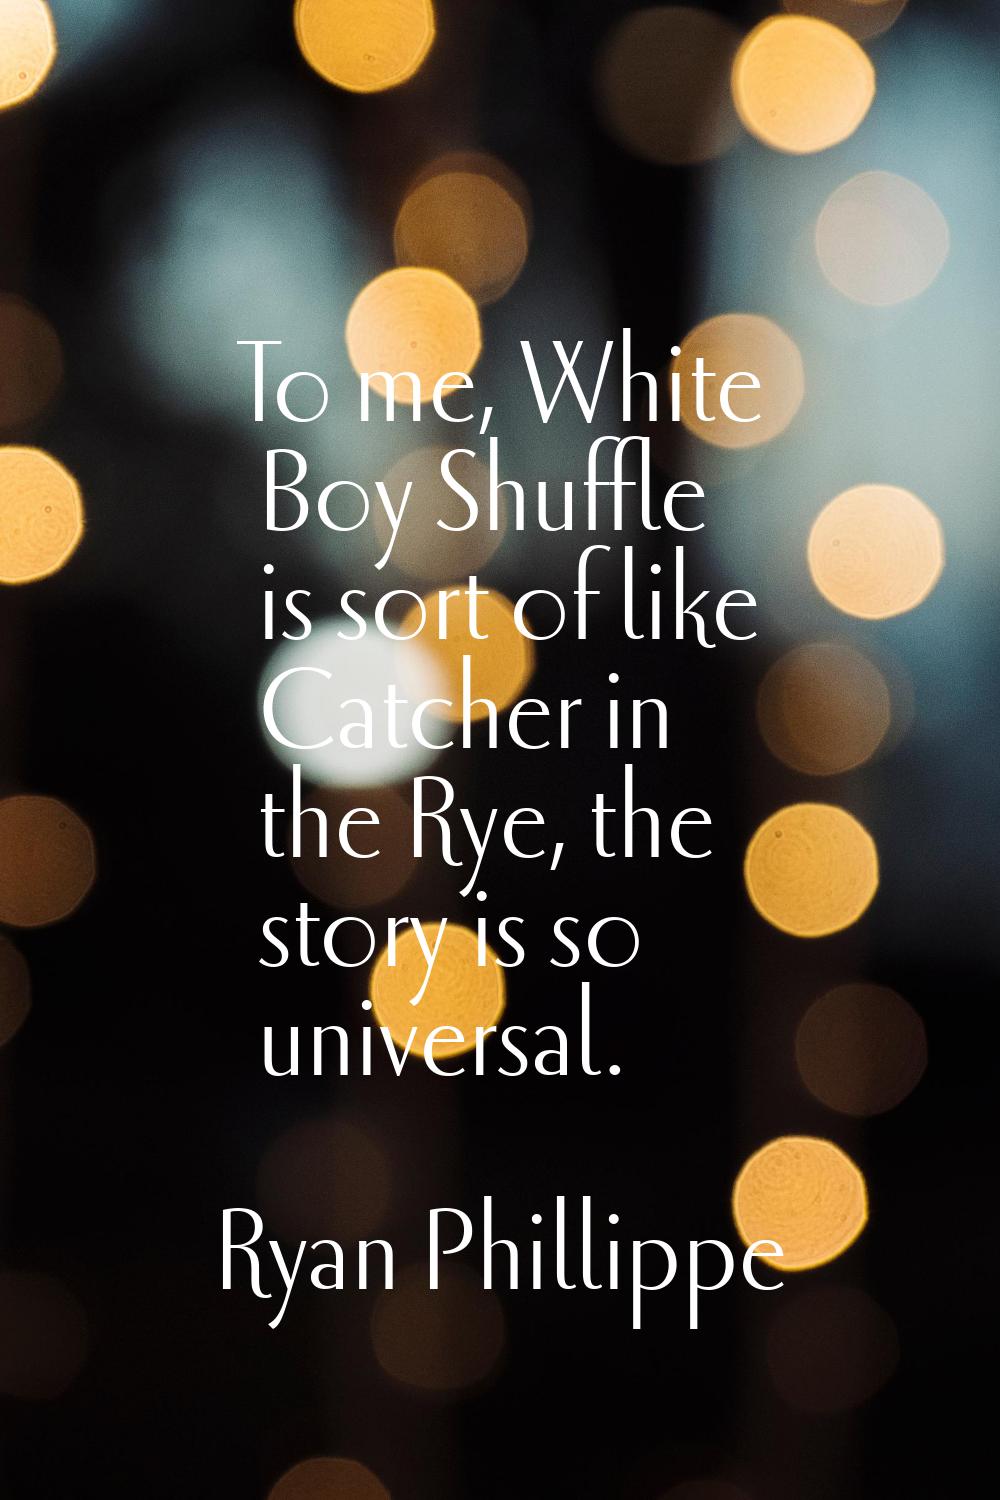 To me, White Boy Shuffle is sort of like Catcher in the Rye, the story is so universal.